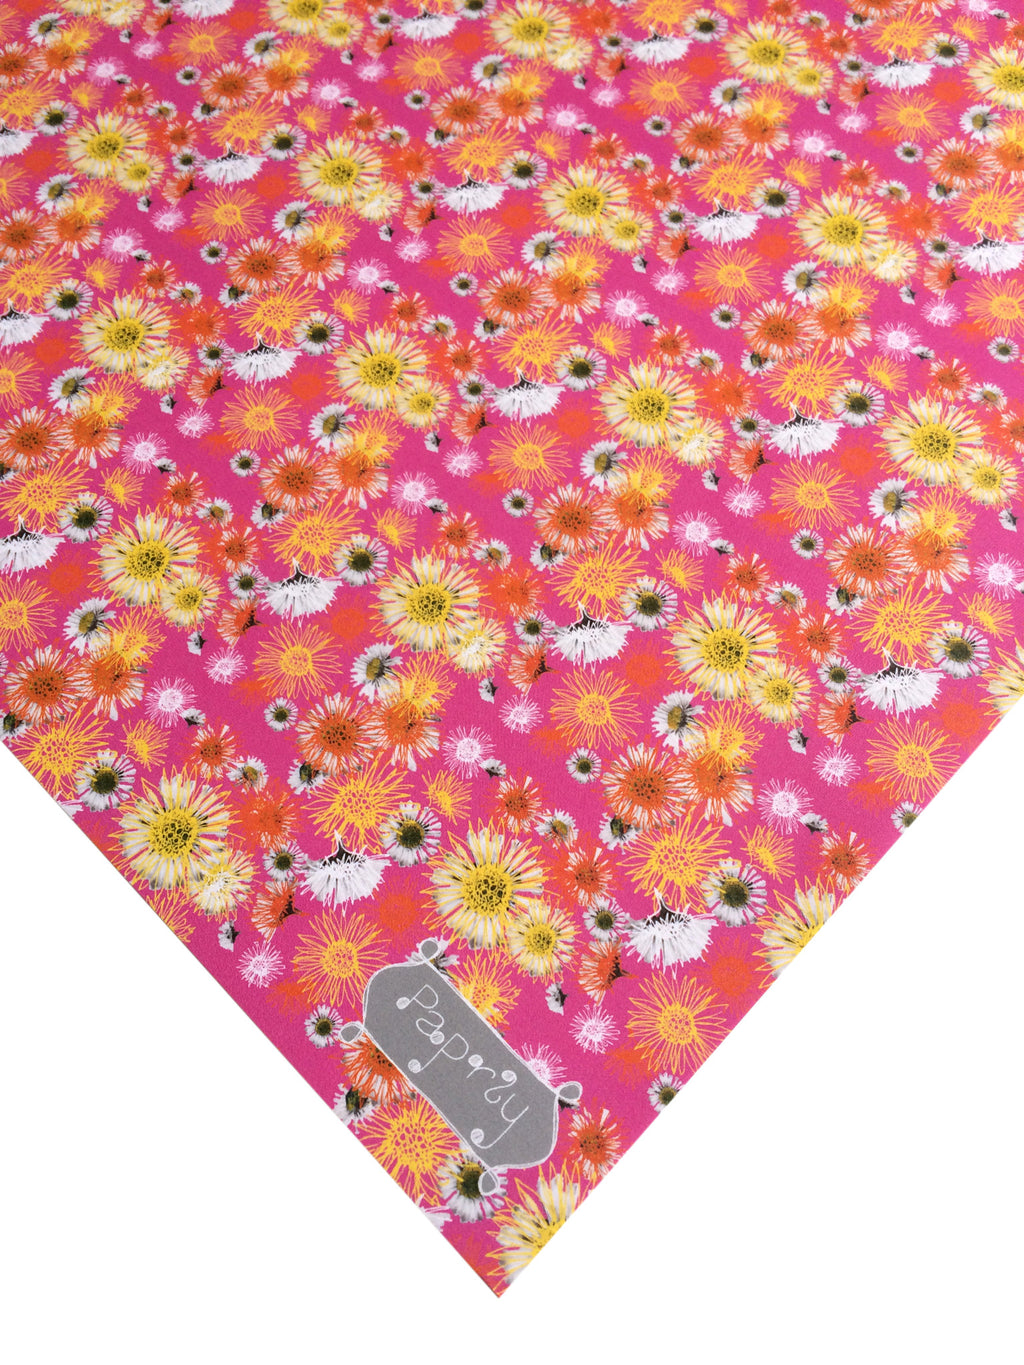 Daisy A Day Pink Gift Wrapping Paper